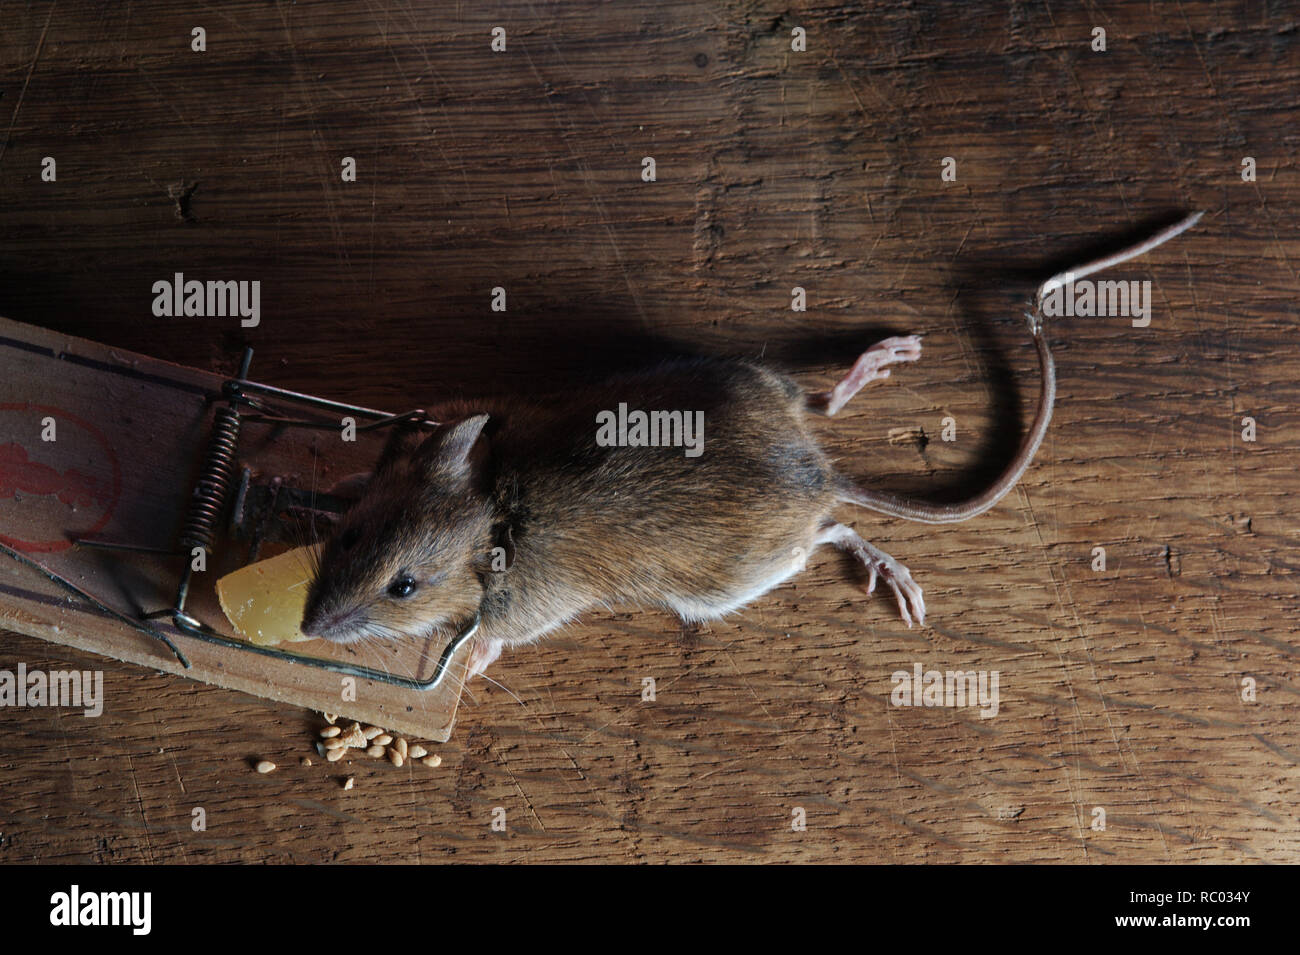 Maus in der Mausefalle gefangen | mouse caught in a mouse trap Stock Photo  - Alamy